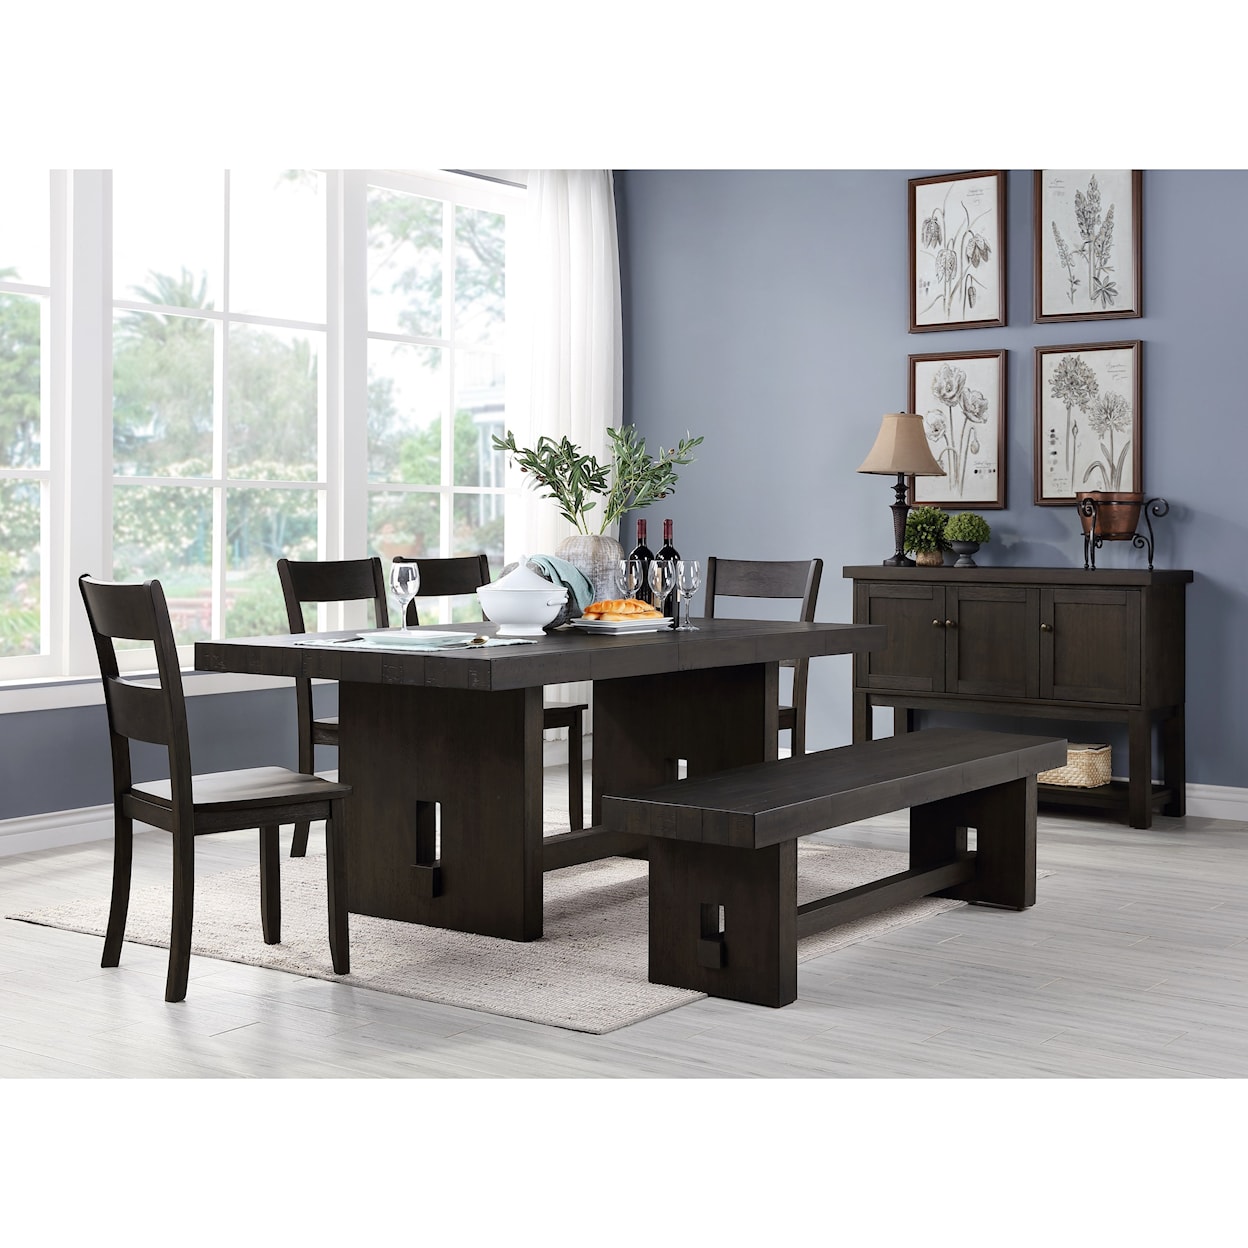 Acme Furniture Haddie Formal Dining Room Group